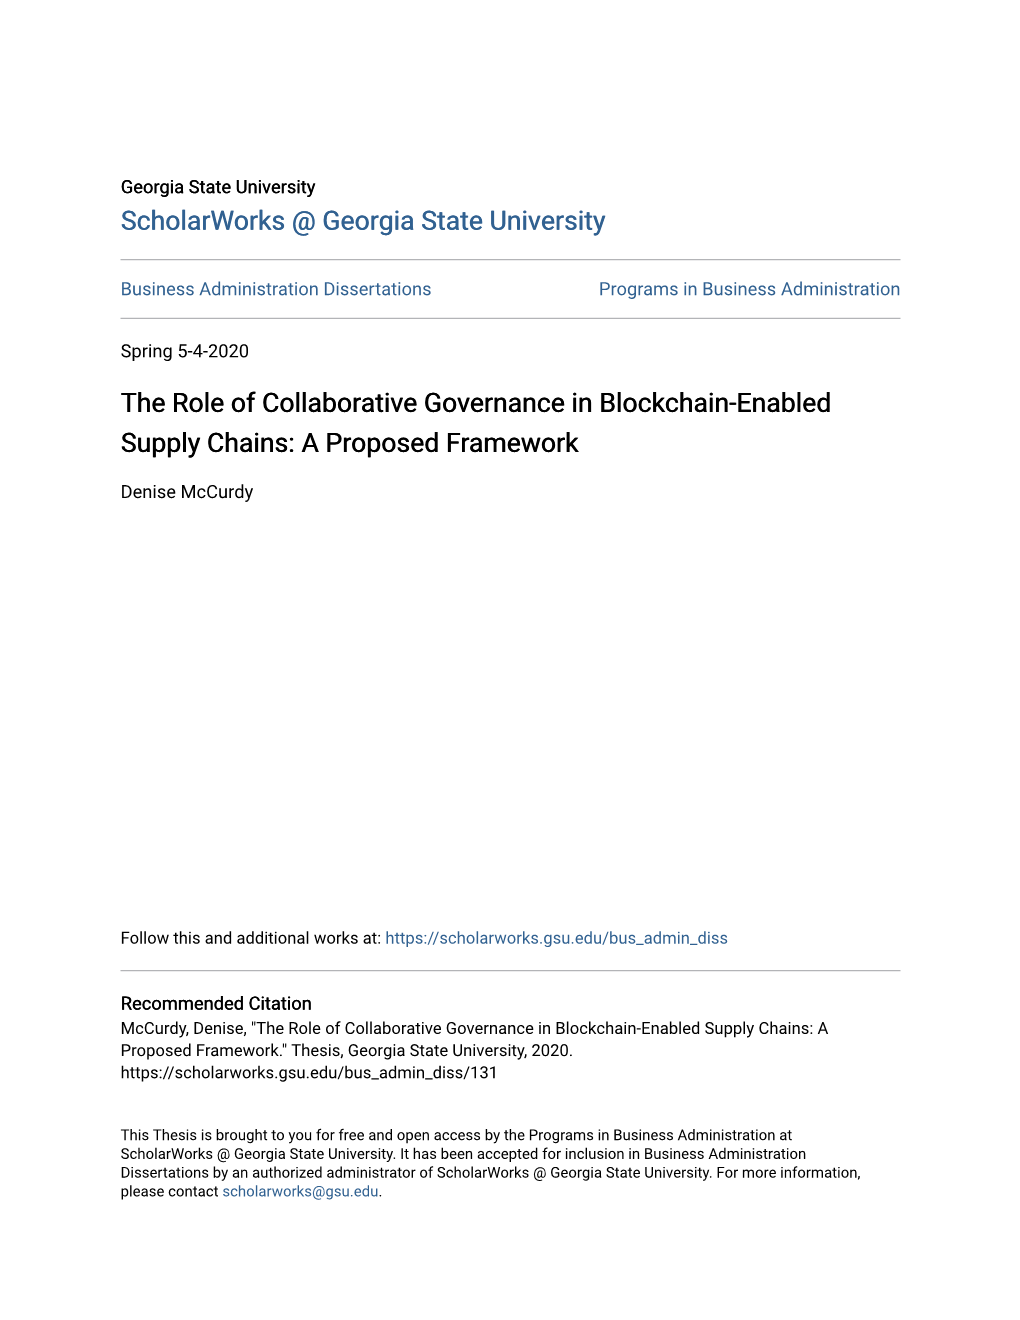 The Role of Collaborative Governance in Blockchain-Enabled Supply Chains: a Proposed Framework